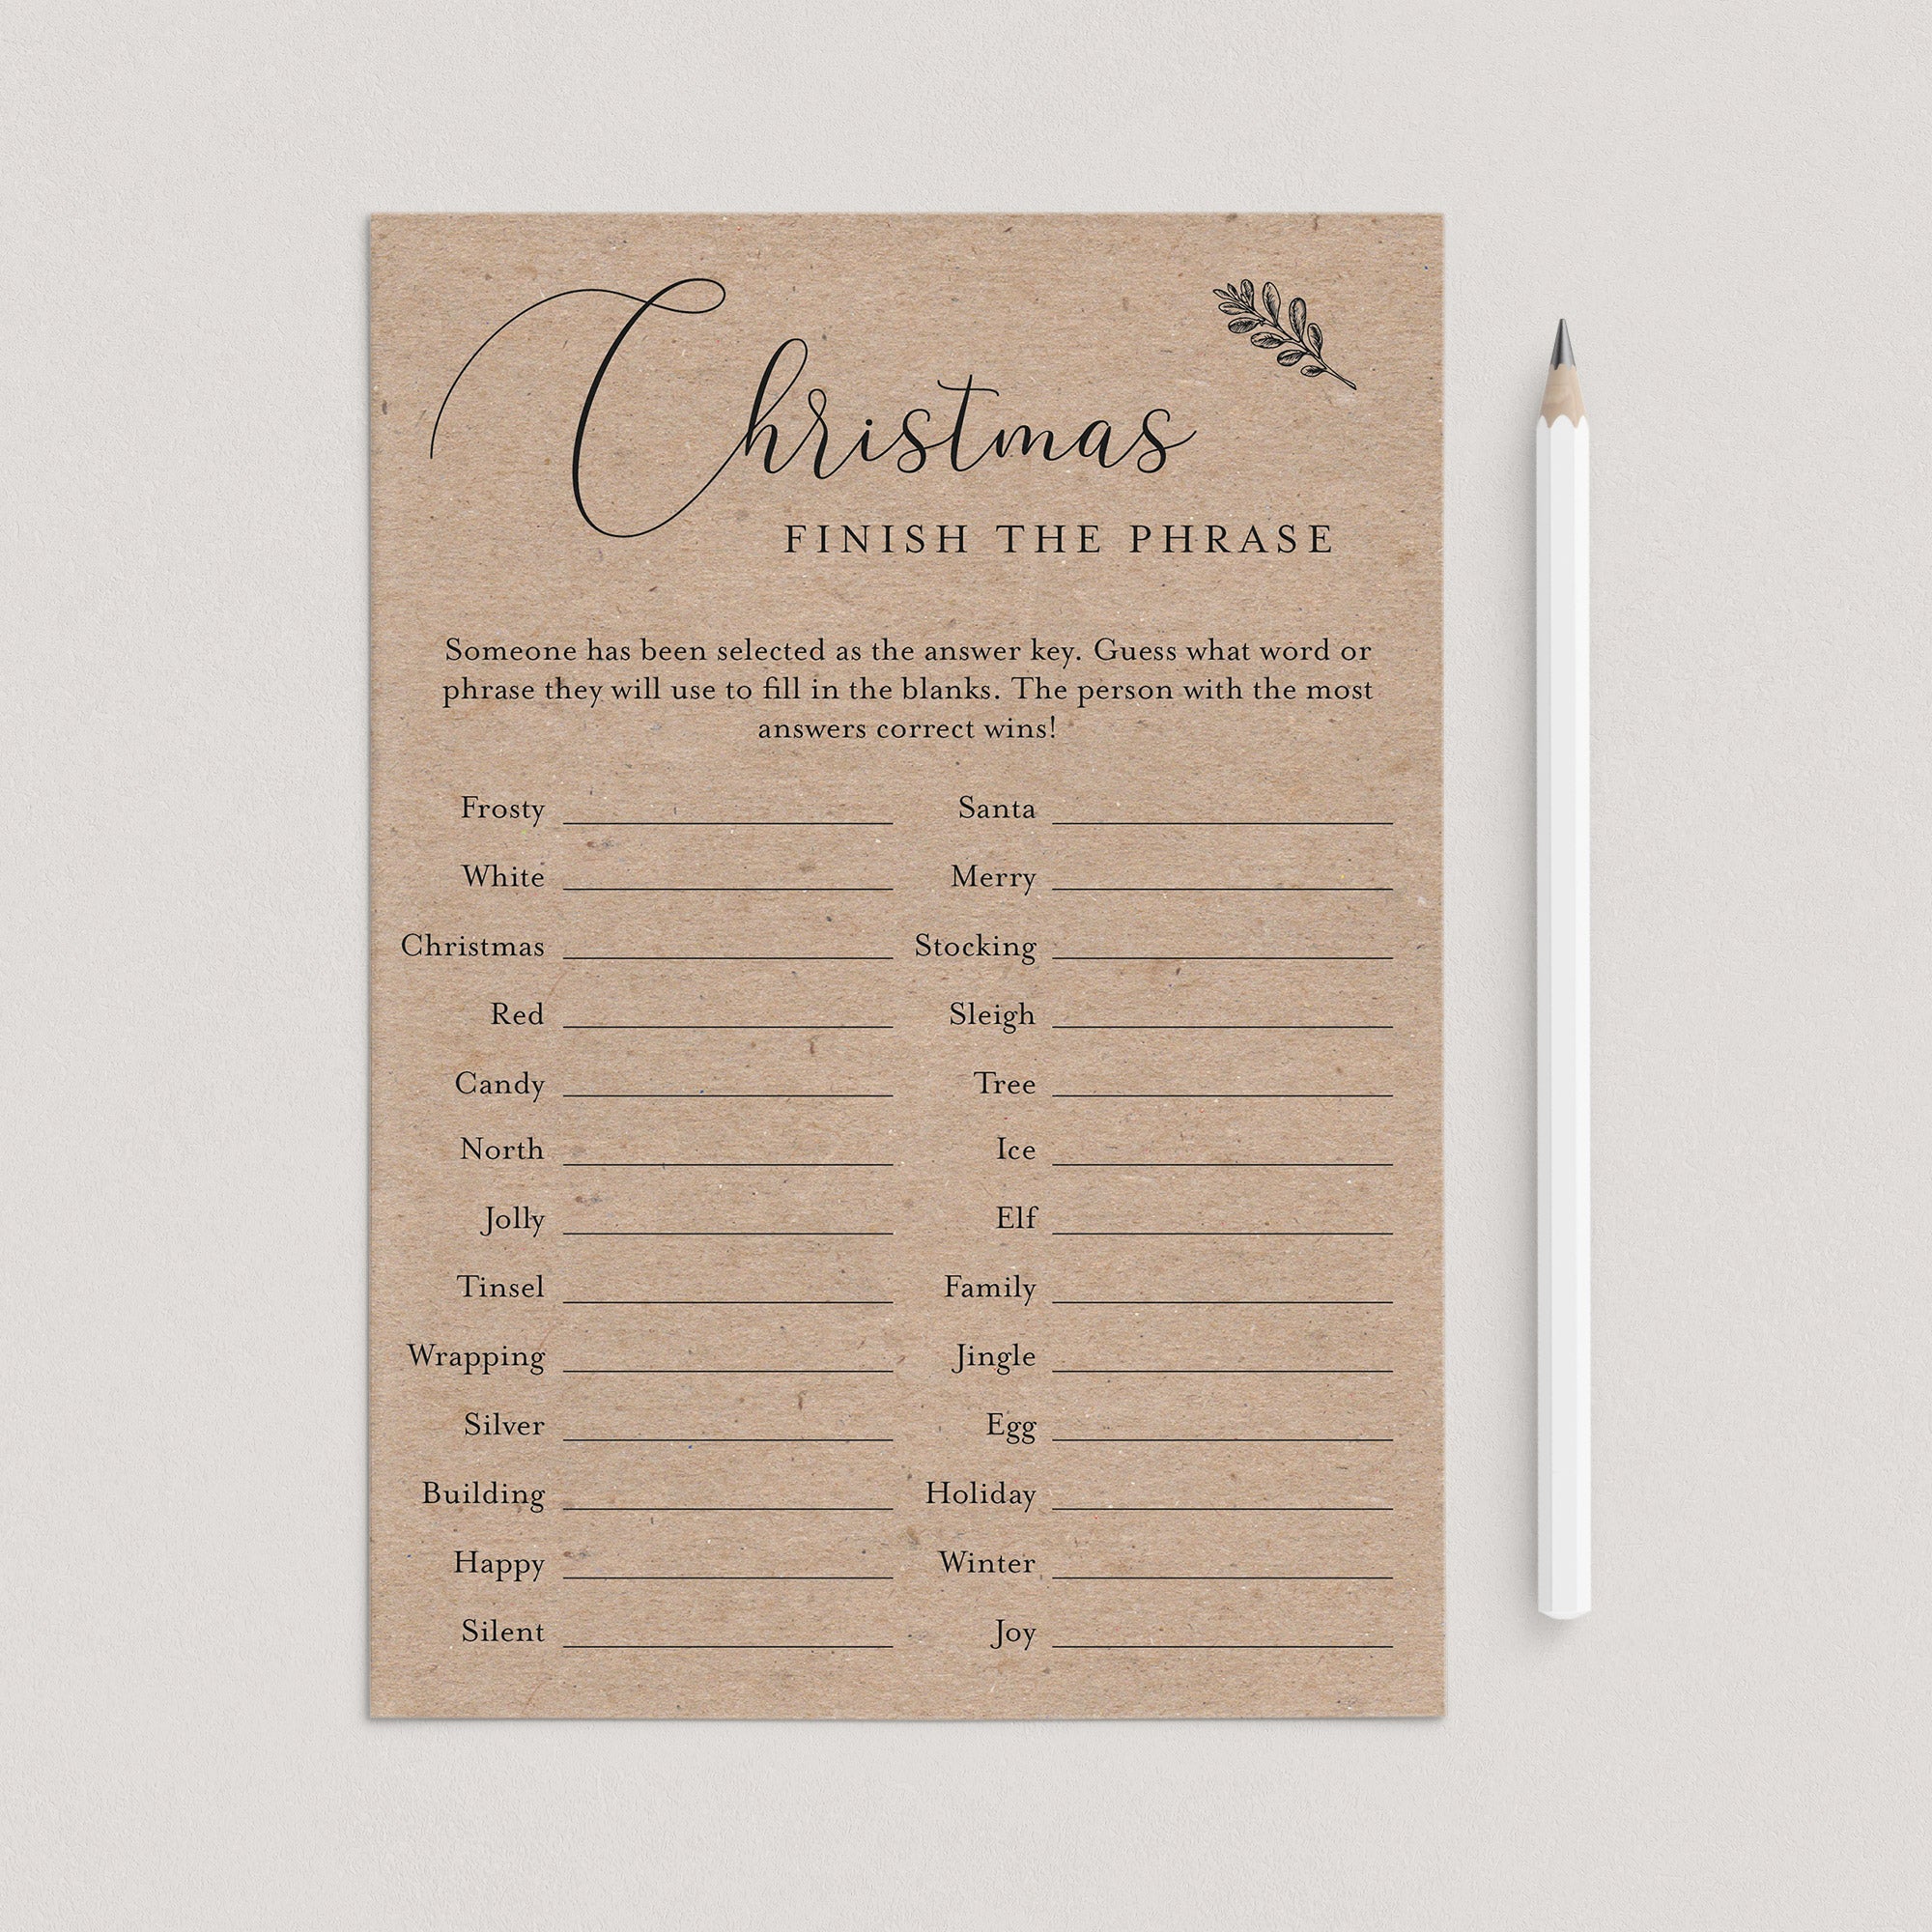 Christmas Office Party Game Finish The Phrase Printable by LittleSizzle